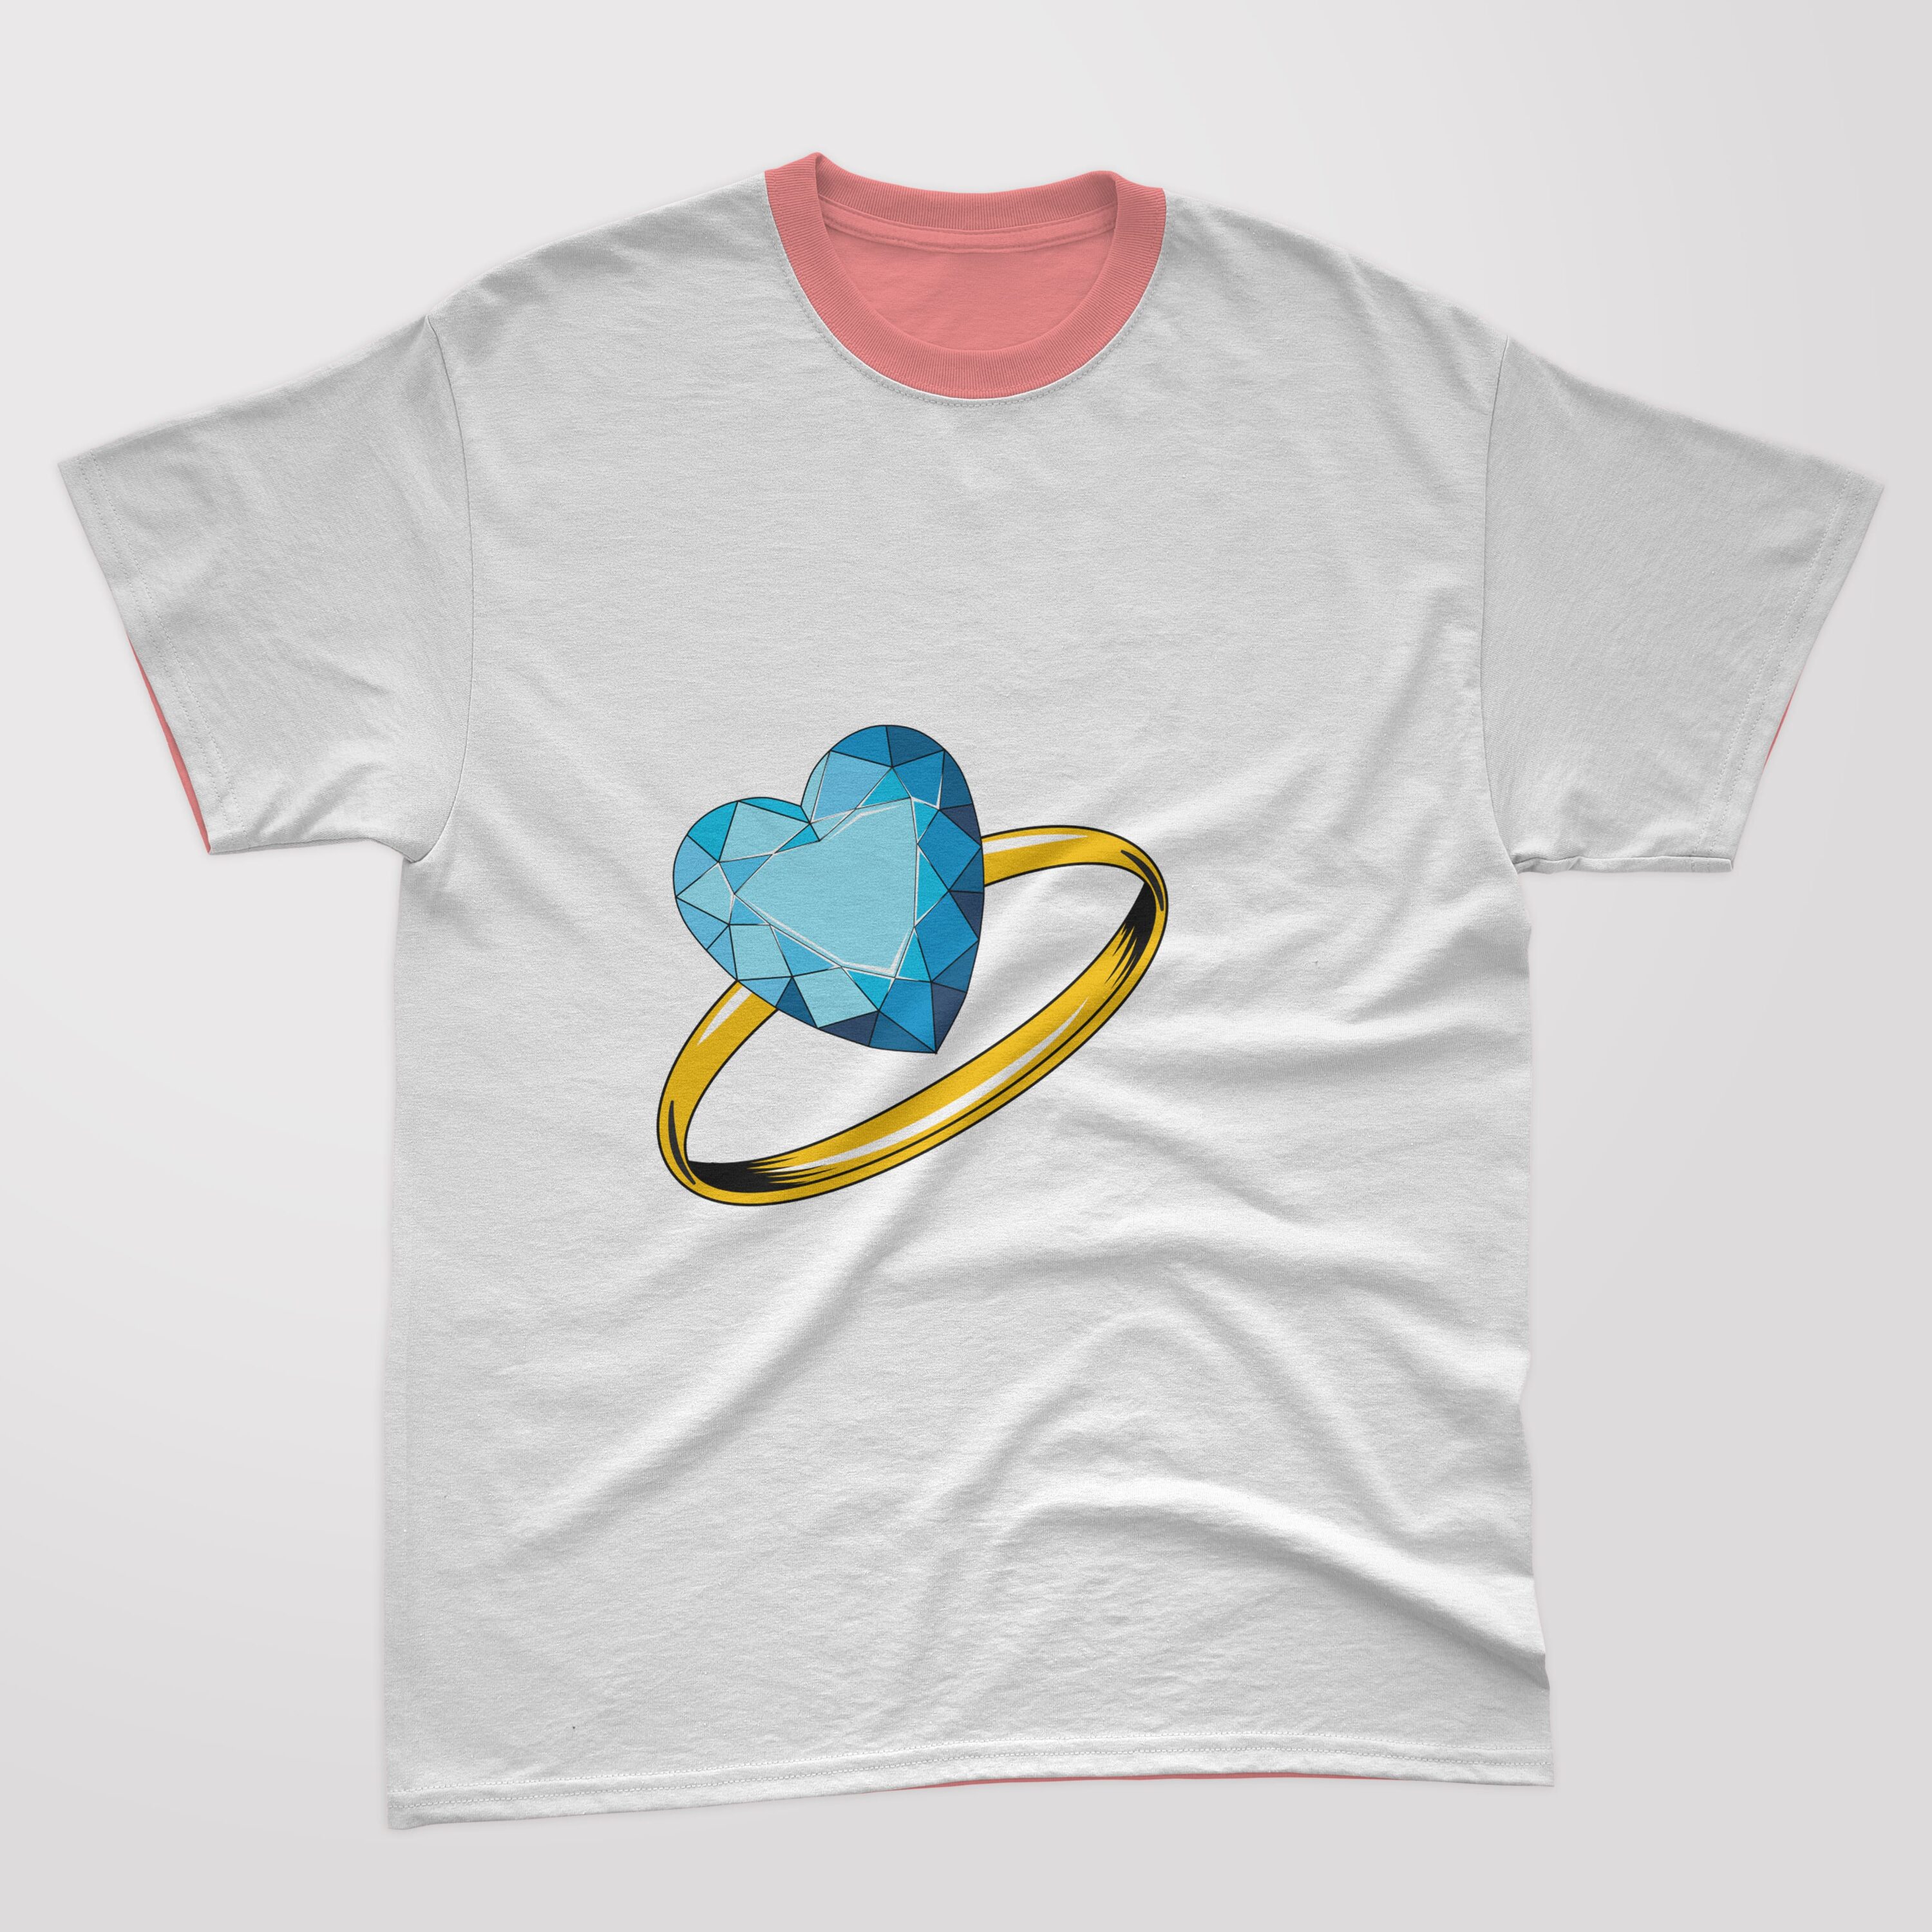 Picture of a T-shirt with a wonderful diamond ring print.